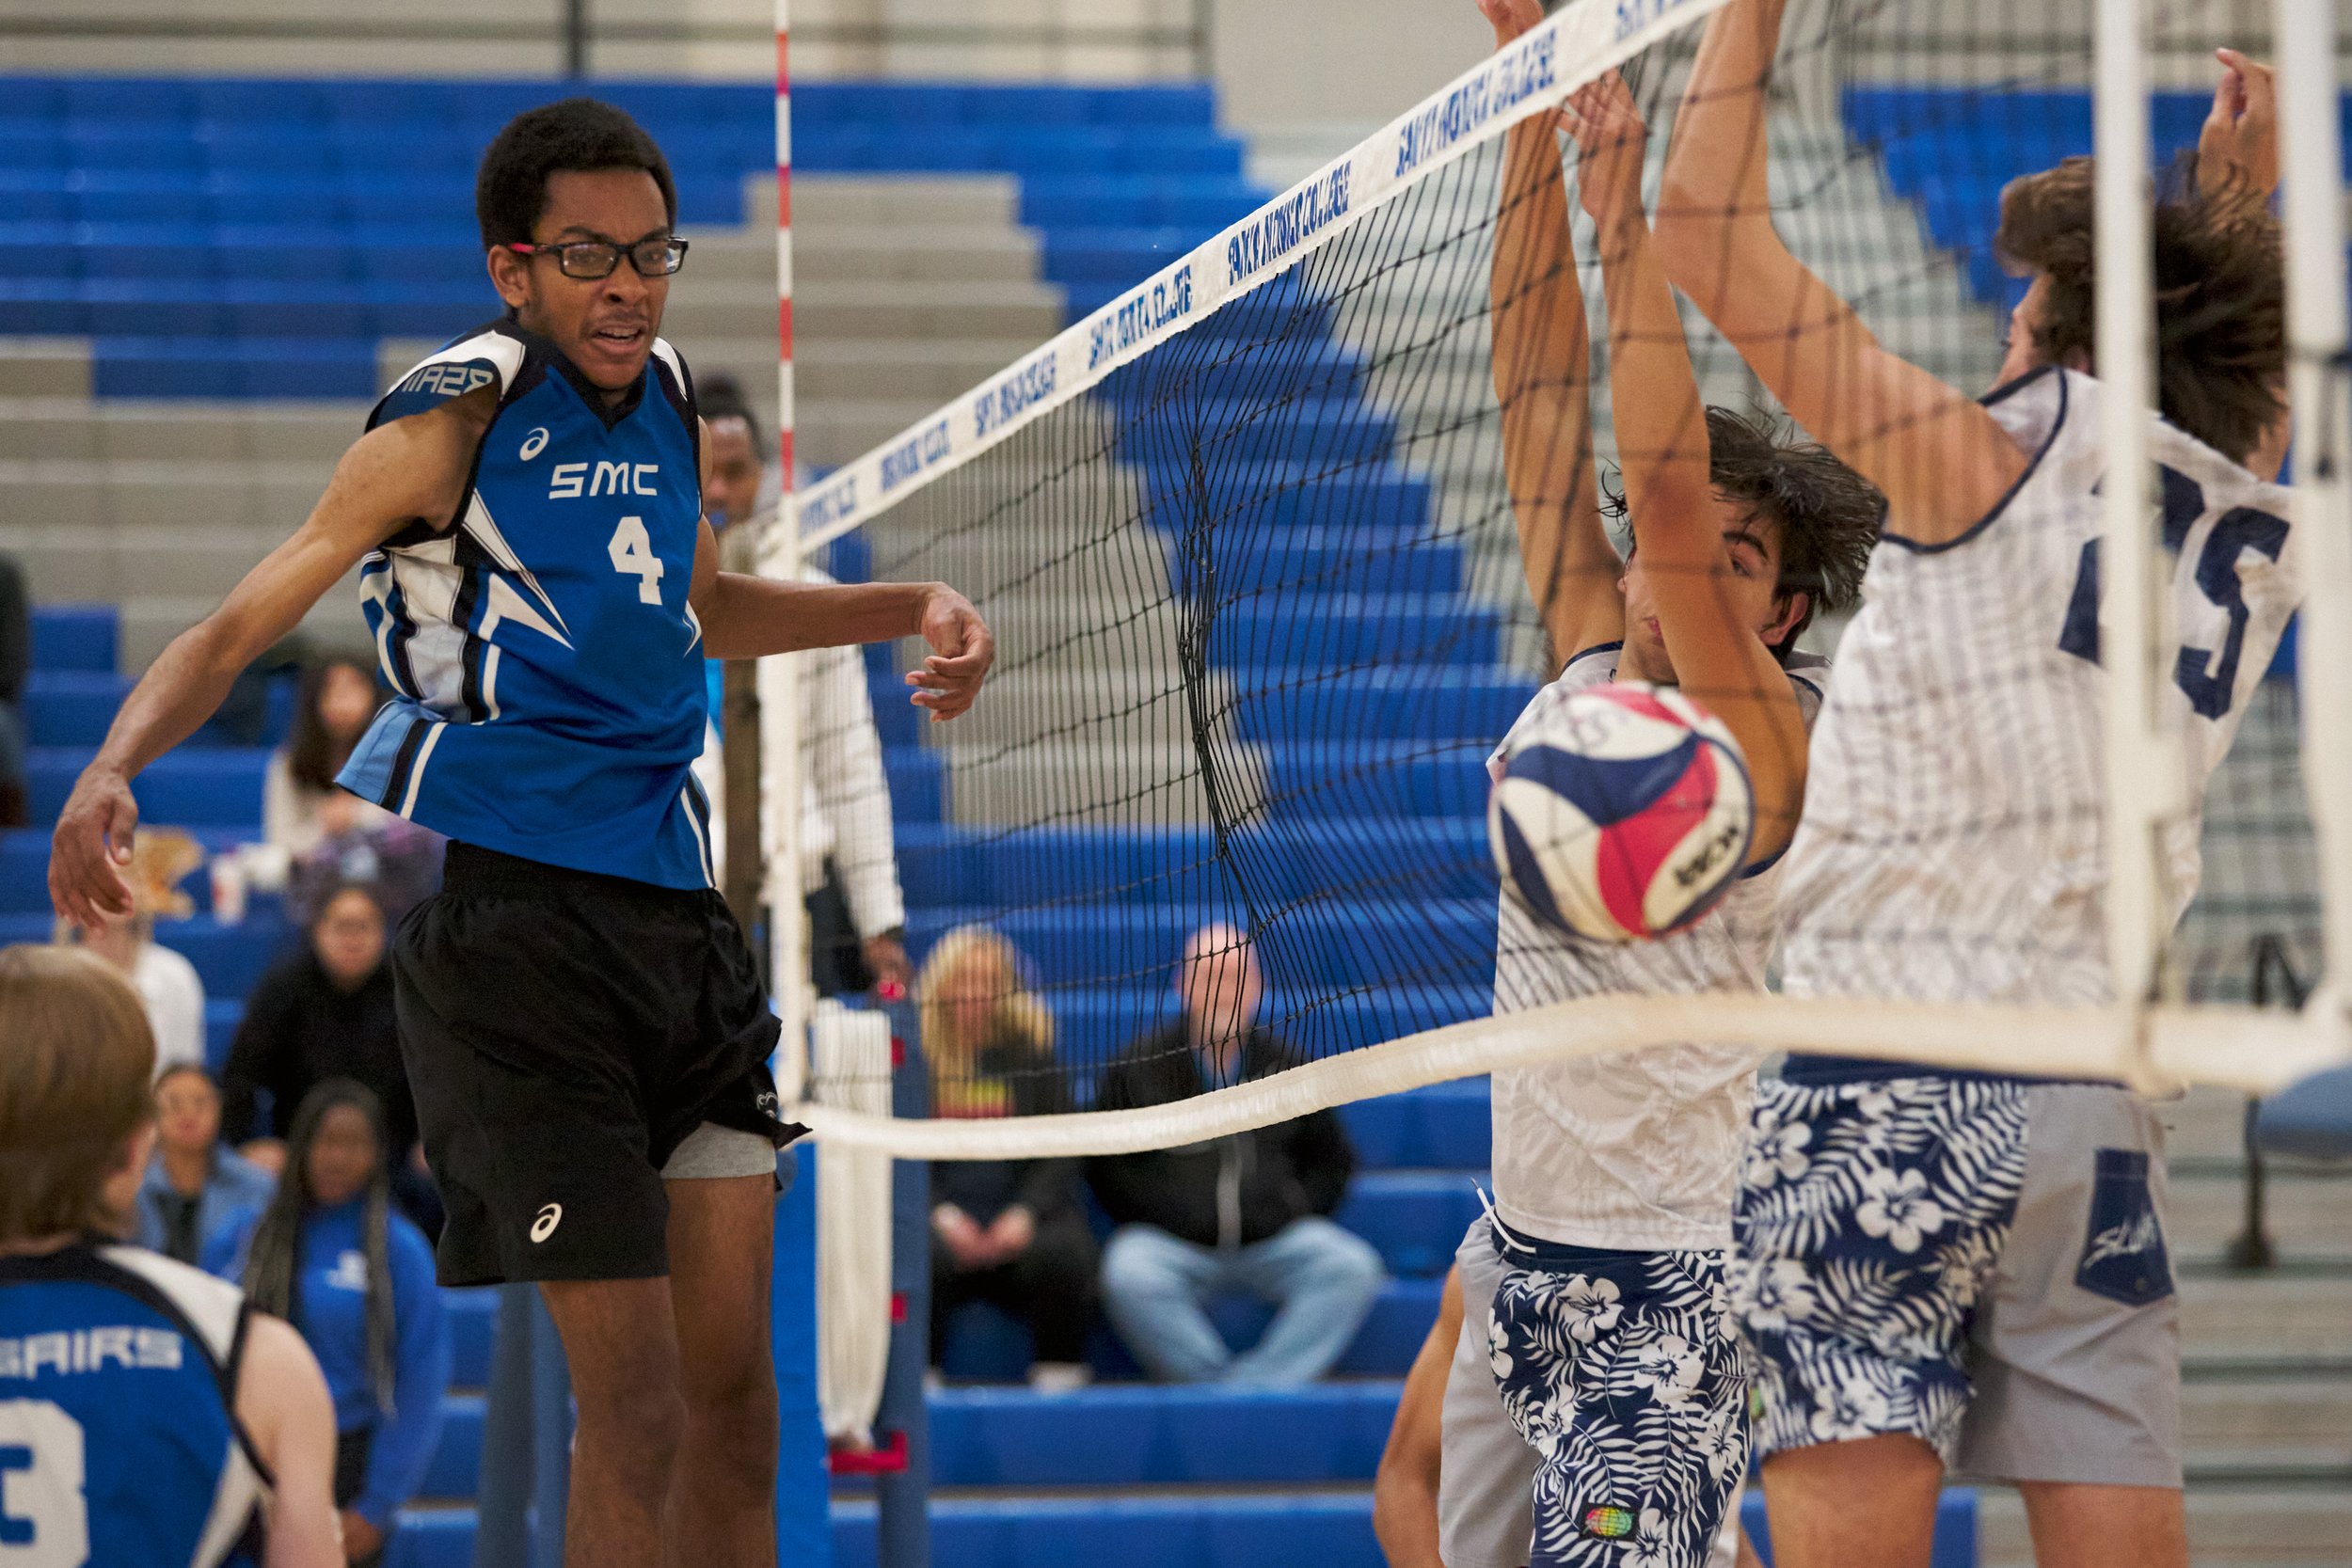  Santa Monica College Corsairs' Beikwaw Yankey scores by sending the ball between the net and Irvine Valley College Lasers' Julio Gutierrez and Jared Irwin during the men's volleyball match on Friday, Feb. 24, 2023, at Corsair Gym in Santa Monica, Ca